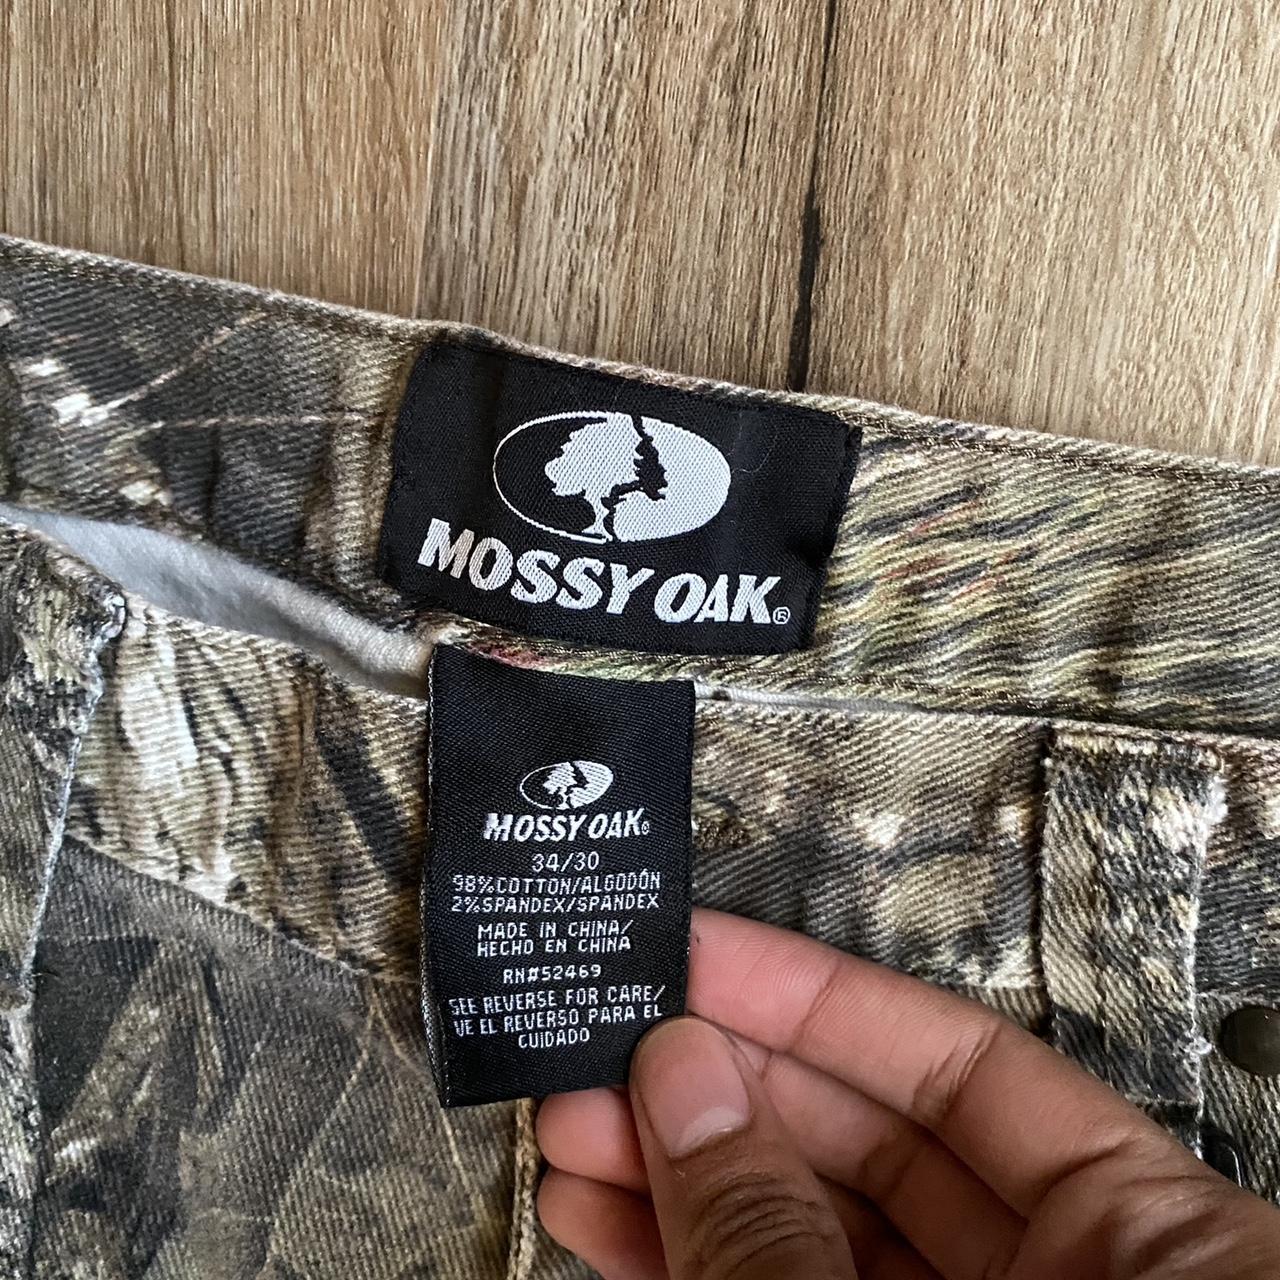 MOSSY OAK CAMO PANTS IN A SIZE 34x30 THIS IS THE... - Depop